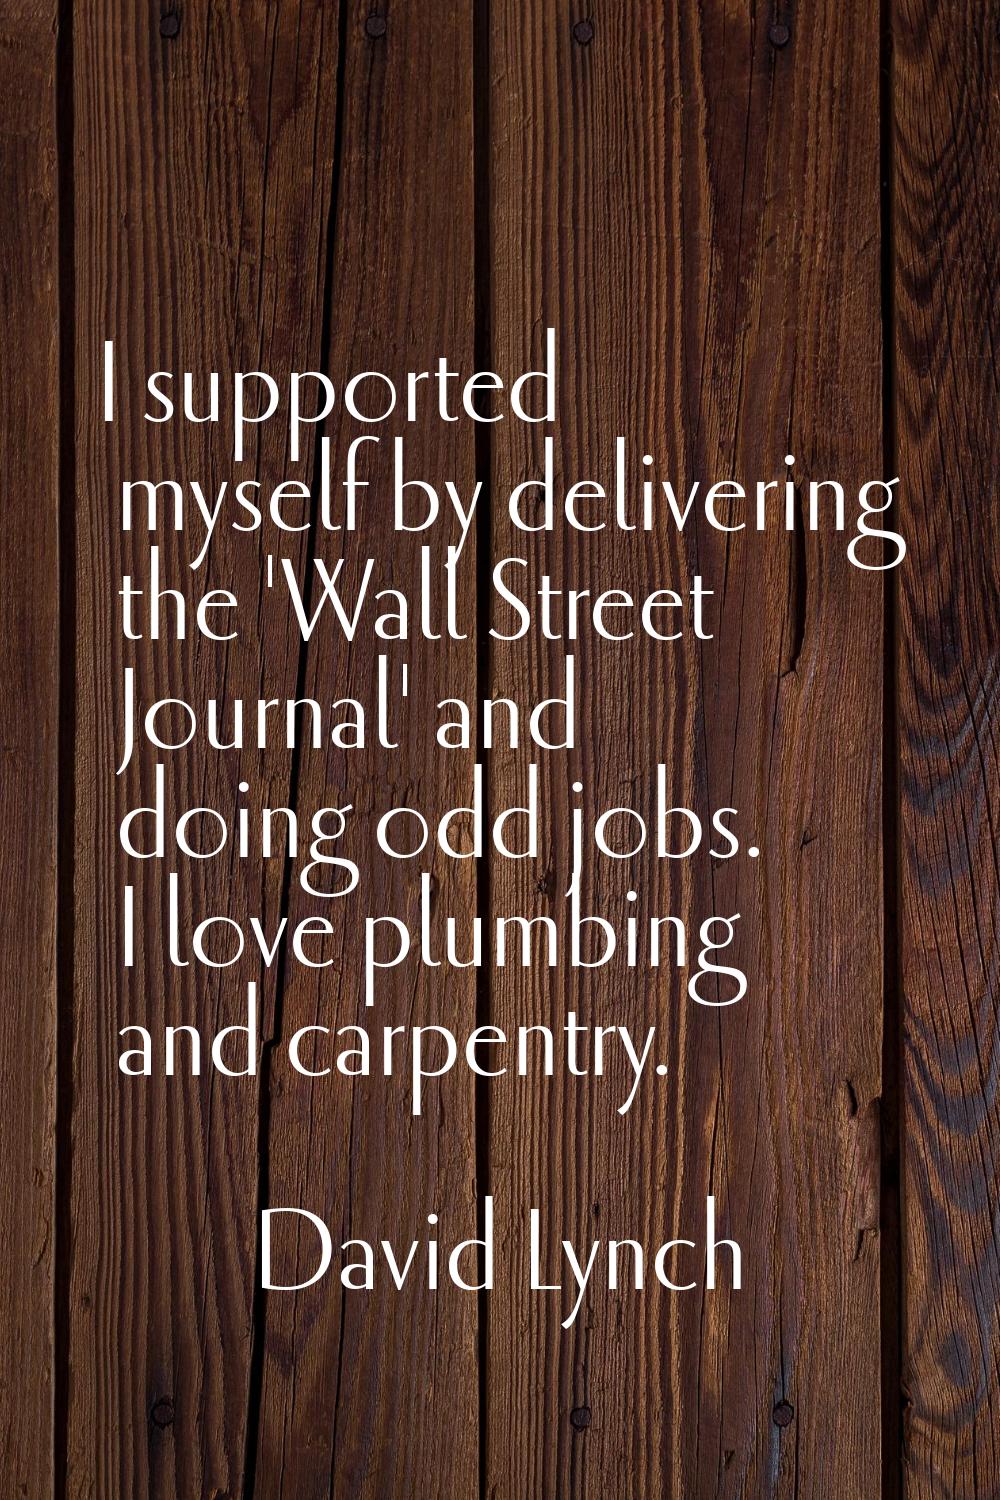 I supported myself by delivering the 'Wall Street Journal' and doing odd jobs. I love plumbing and 